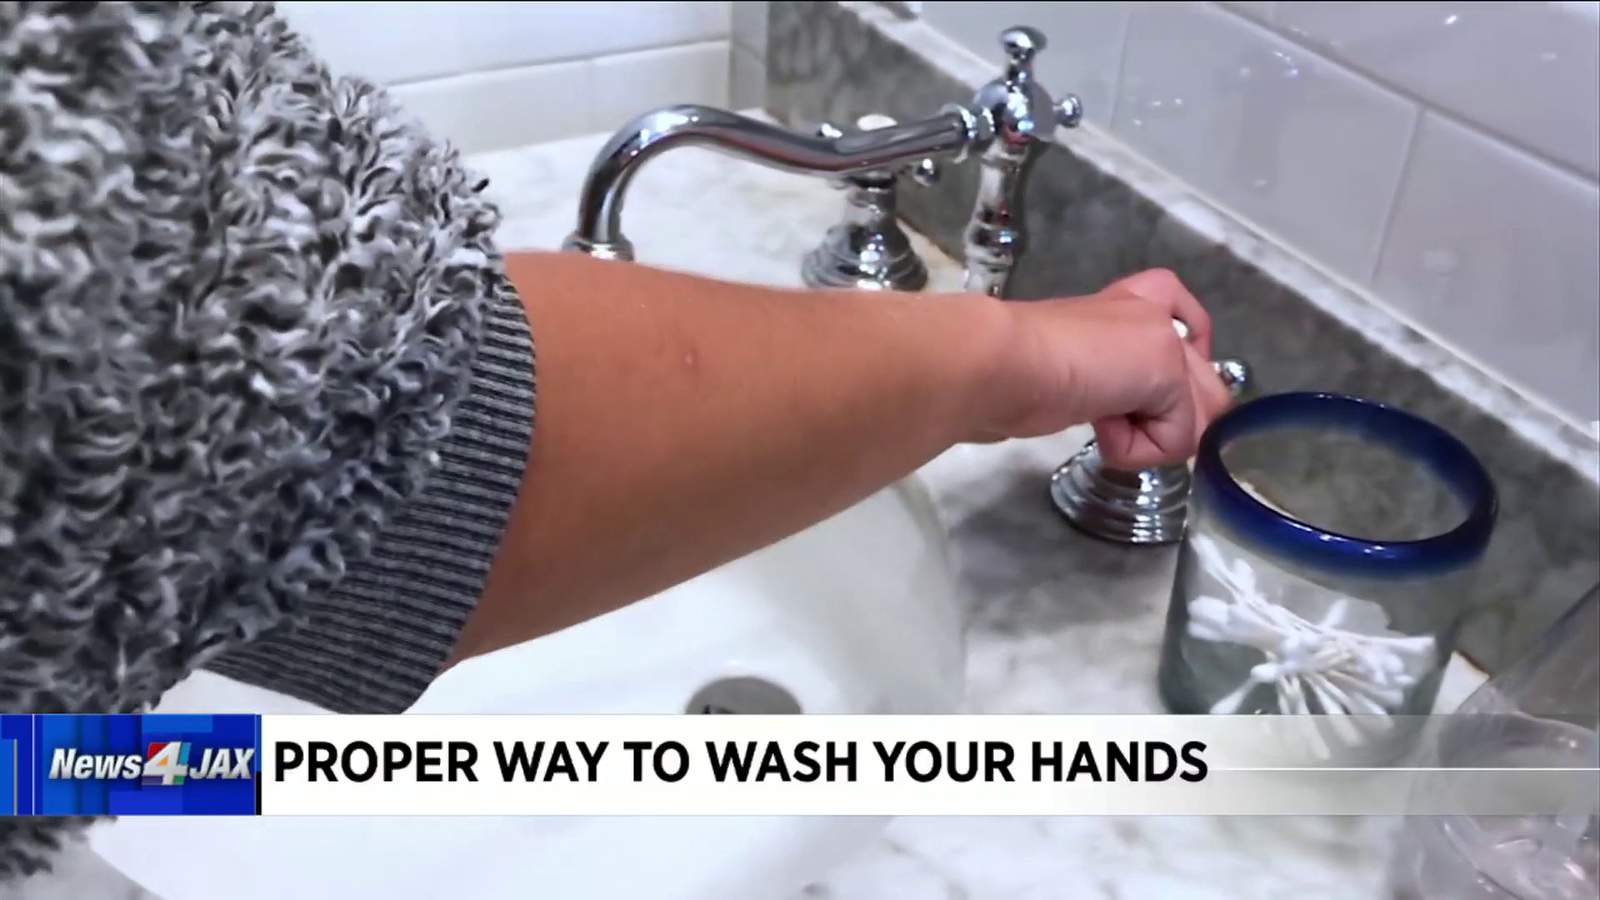 Wash your darn hands, people -- it’s the best way to stay healthy